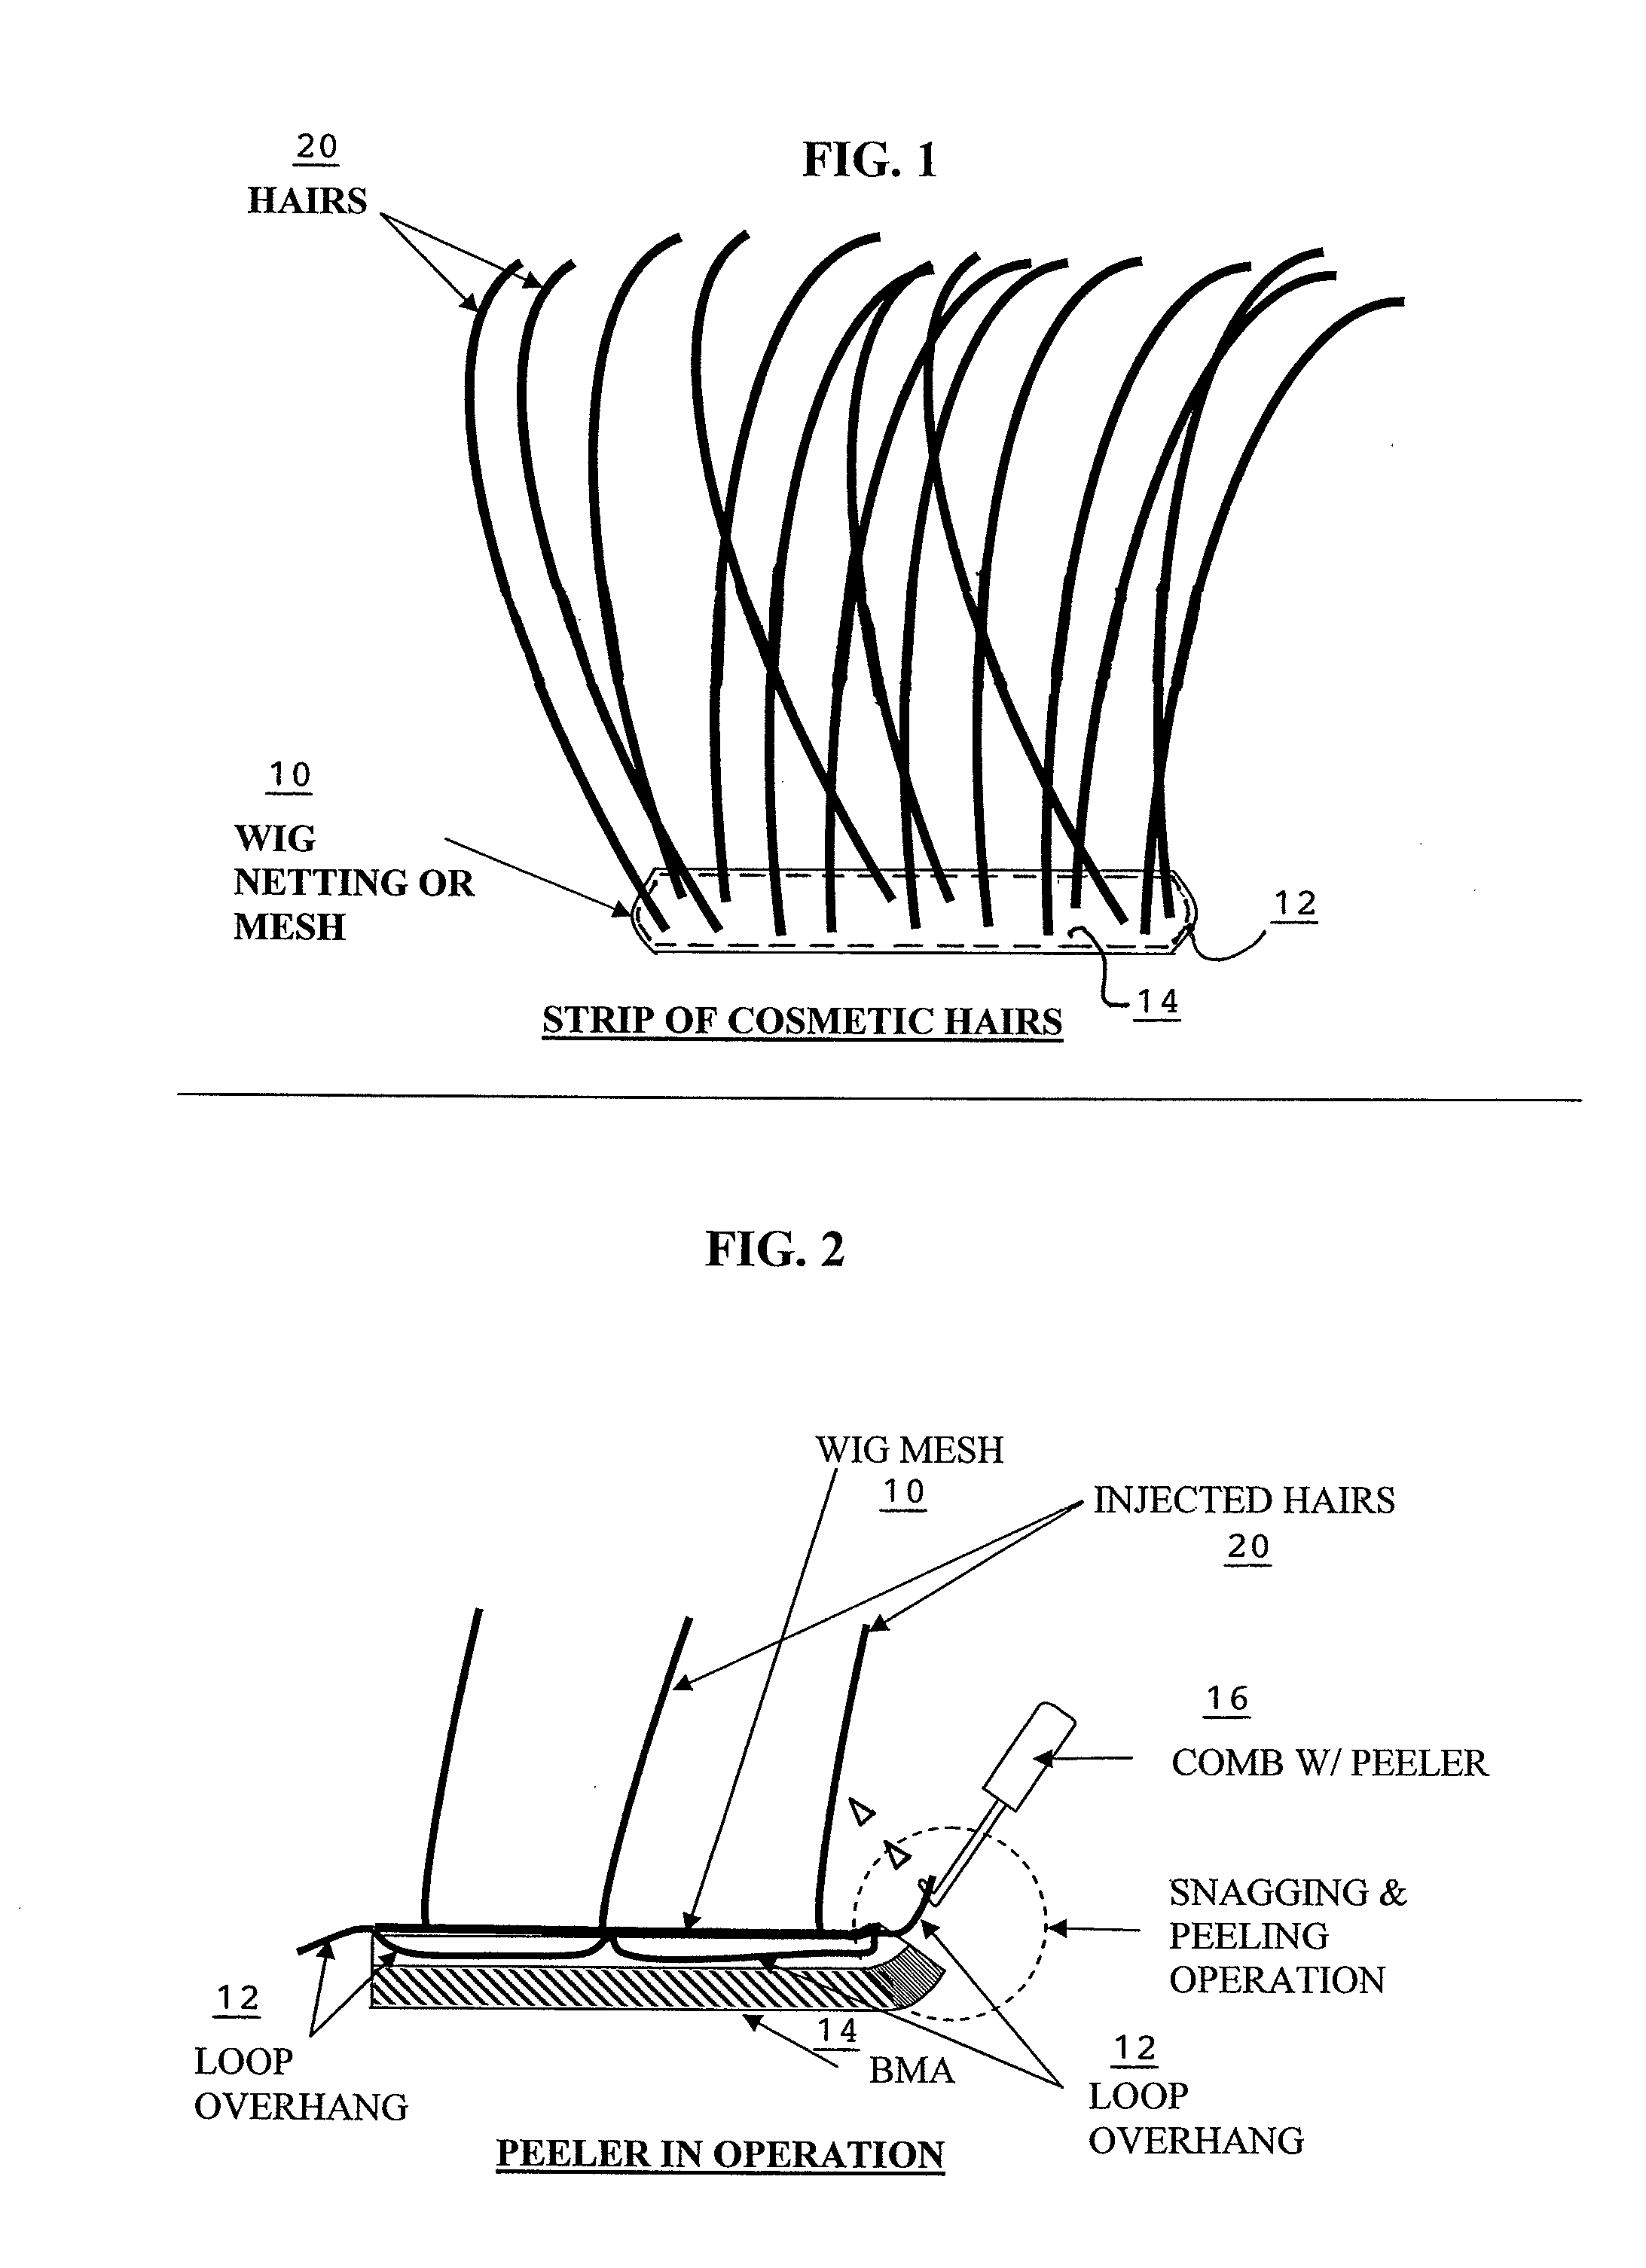 System and method for applying and removing cosmetic hair using biomimetic microstructure adhesive layer